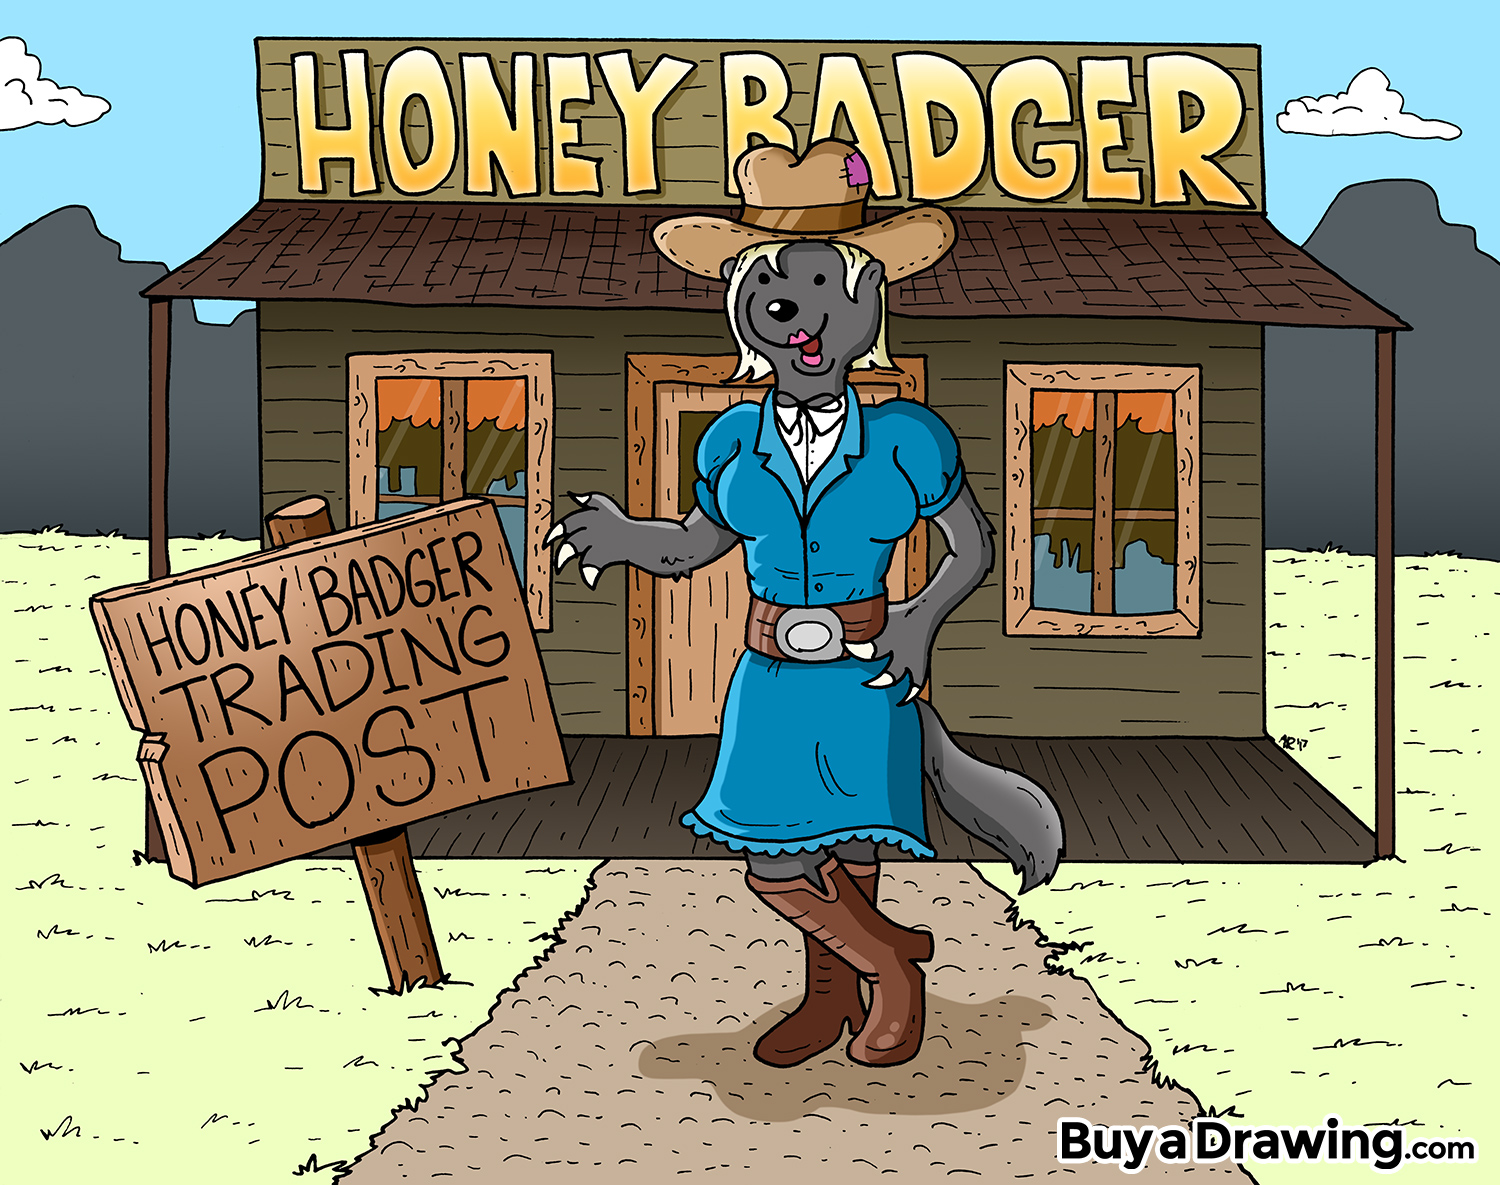 Cartoon Honey Badger Drawing for a Trading Post